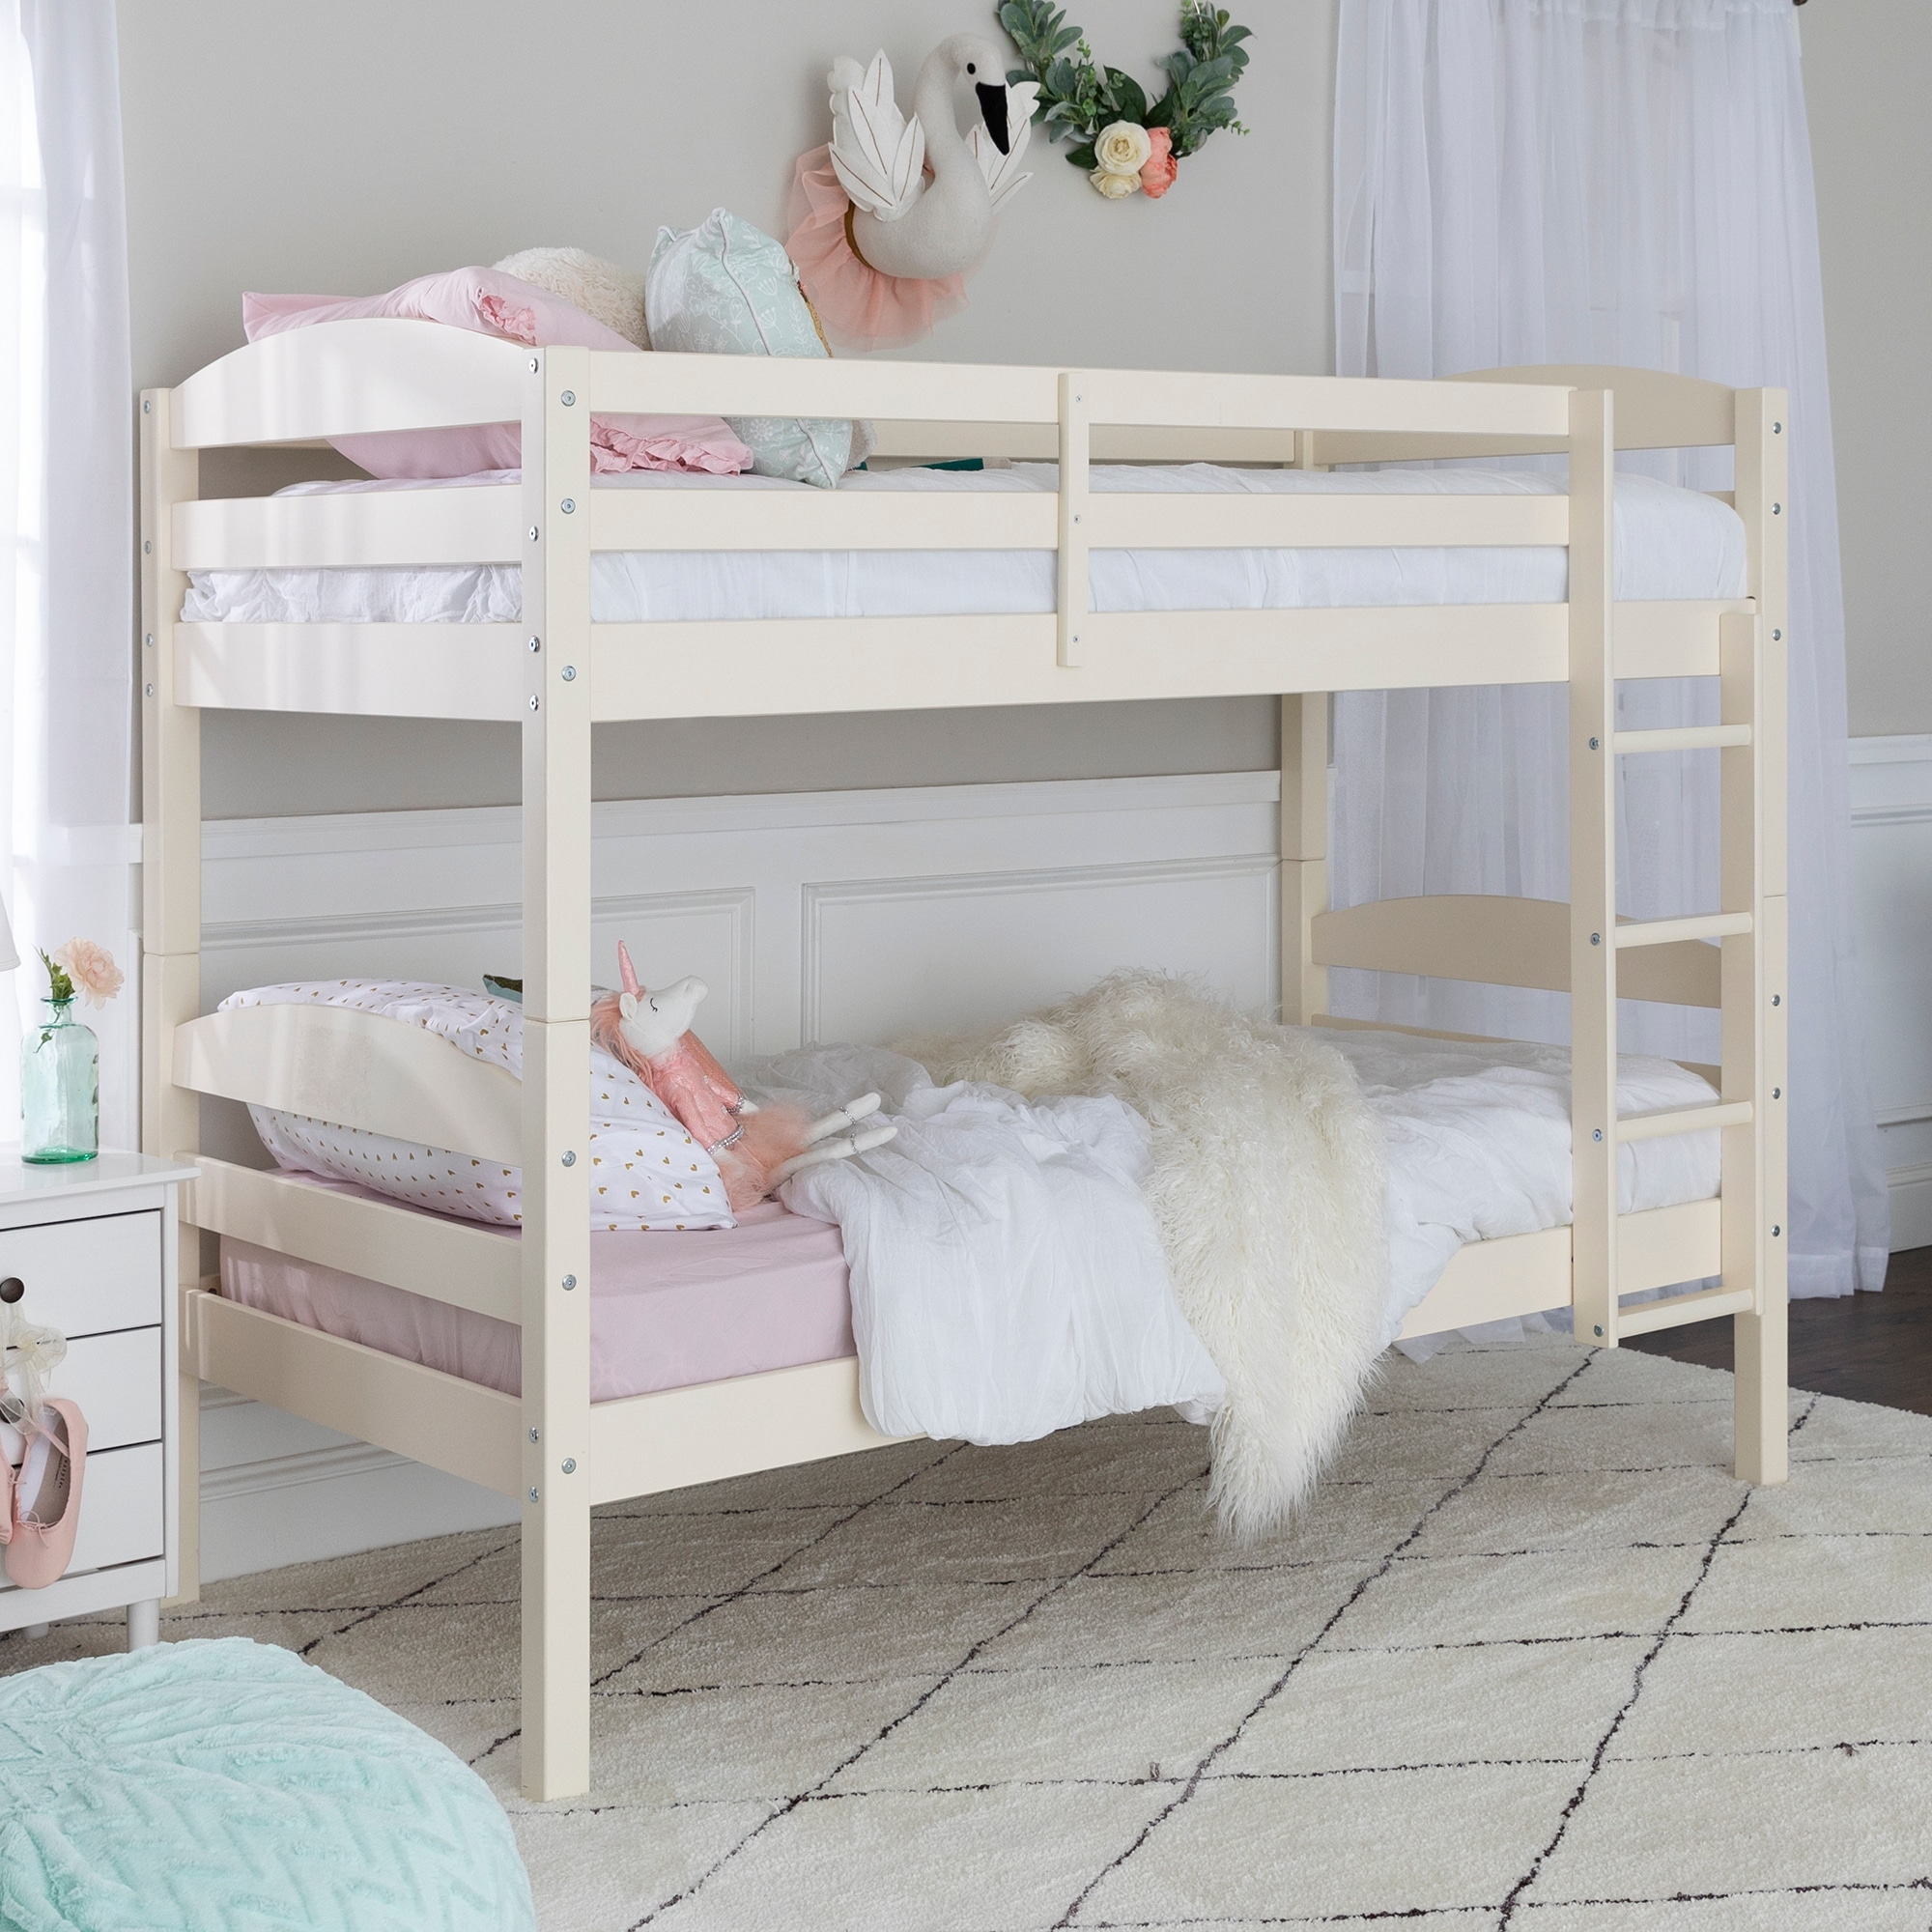 white wooden bunk beds with stairs